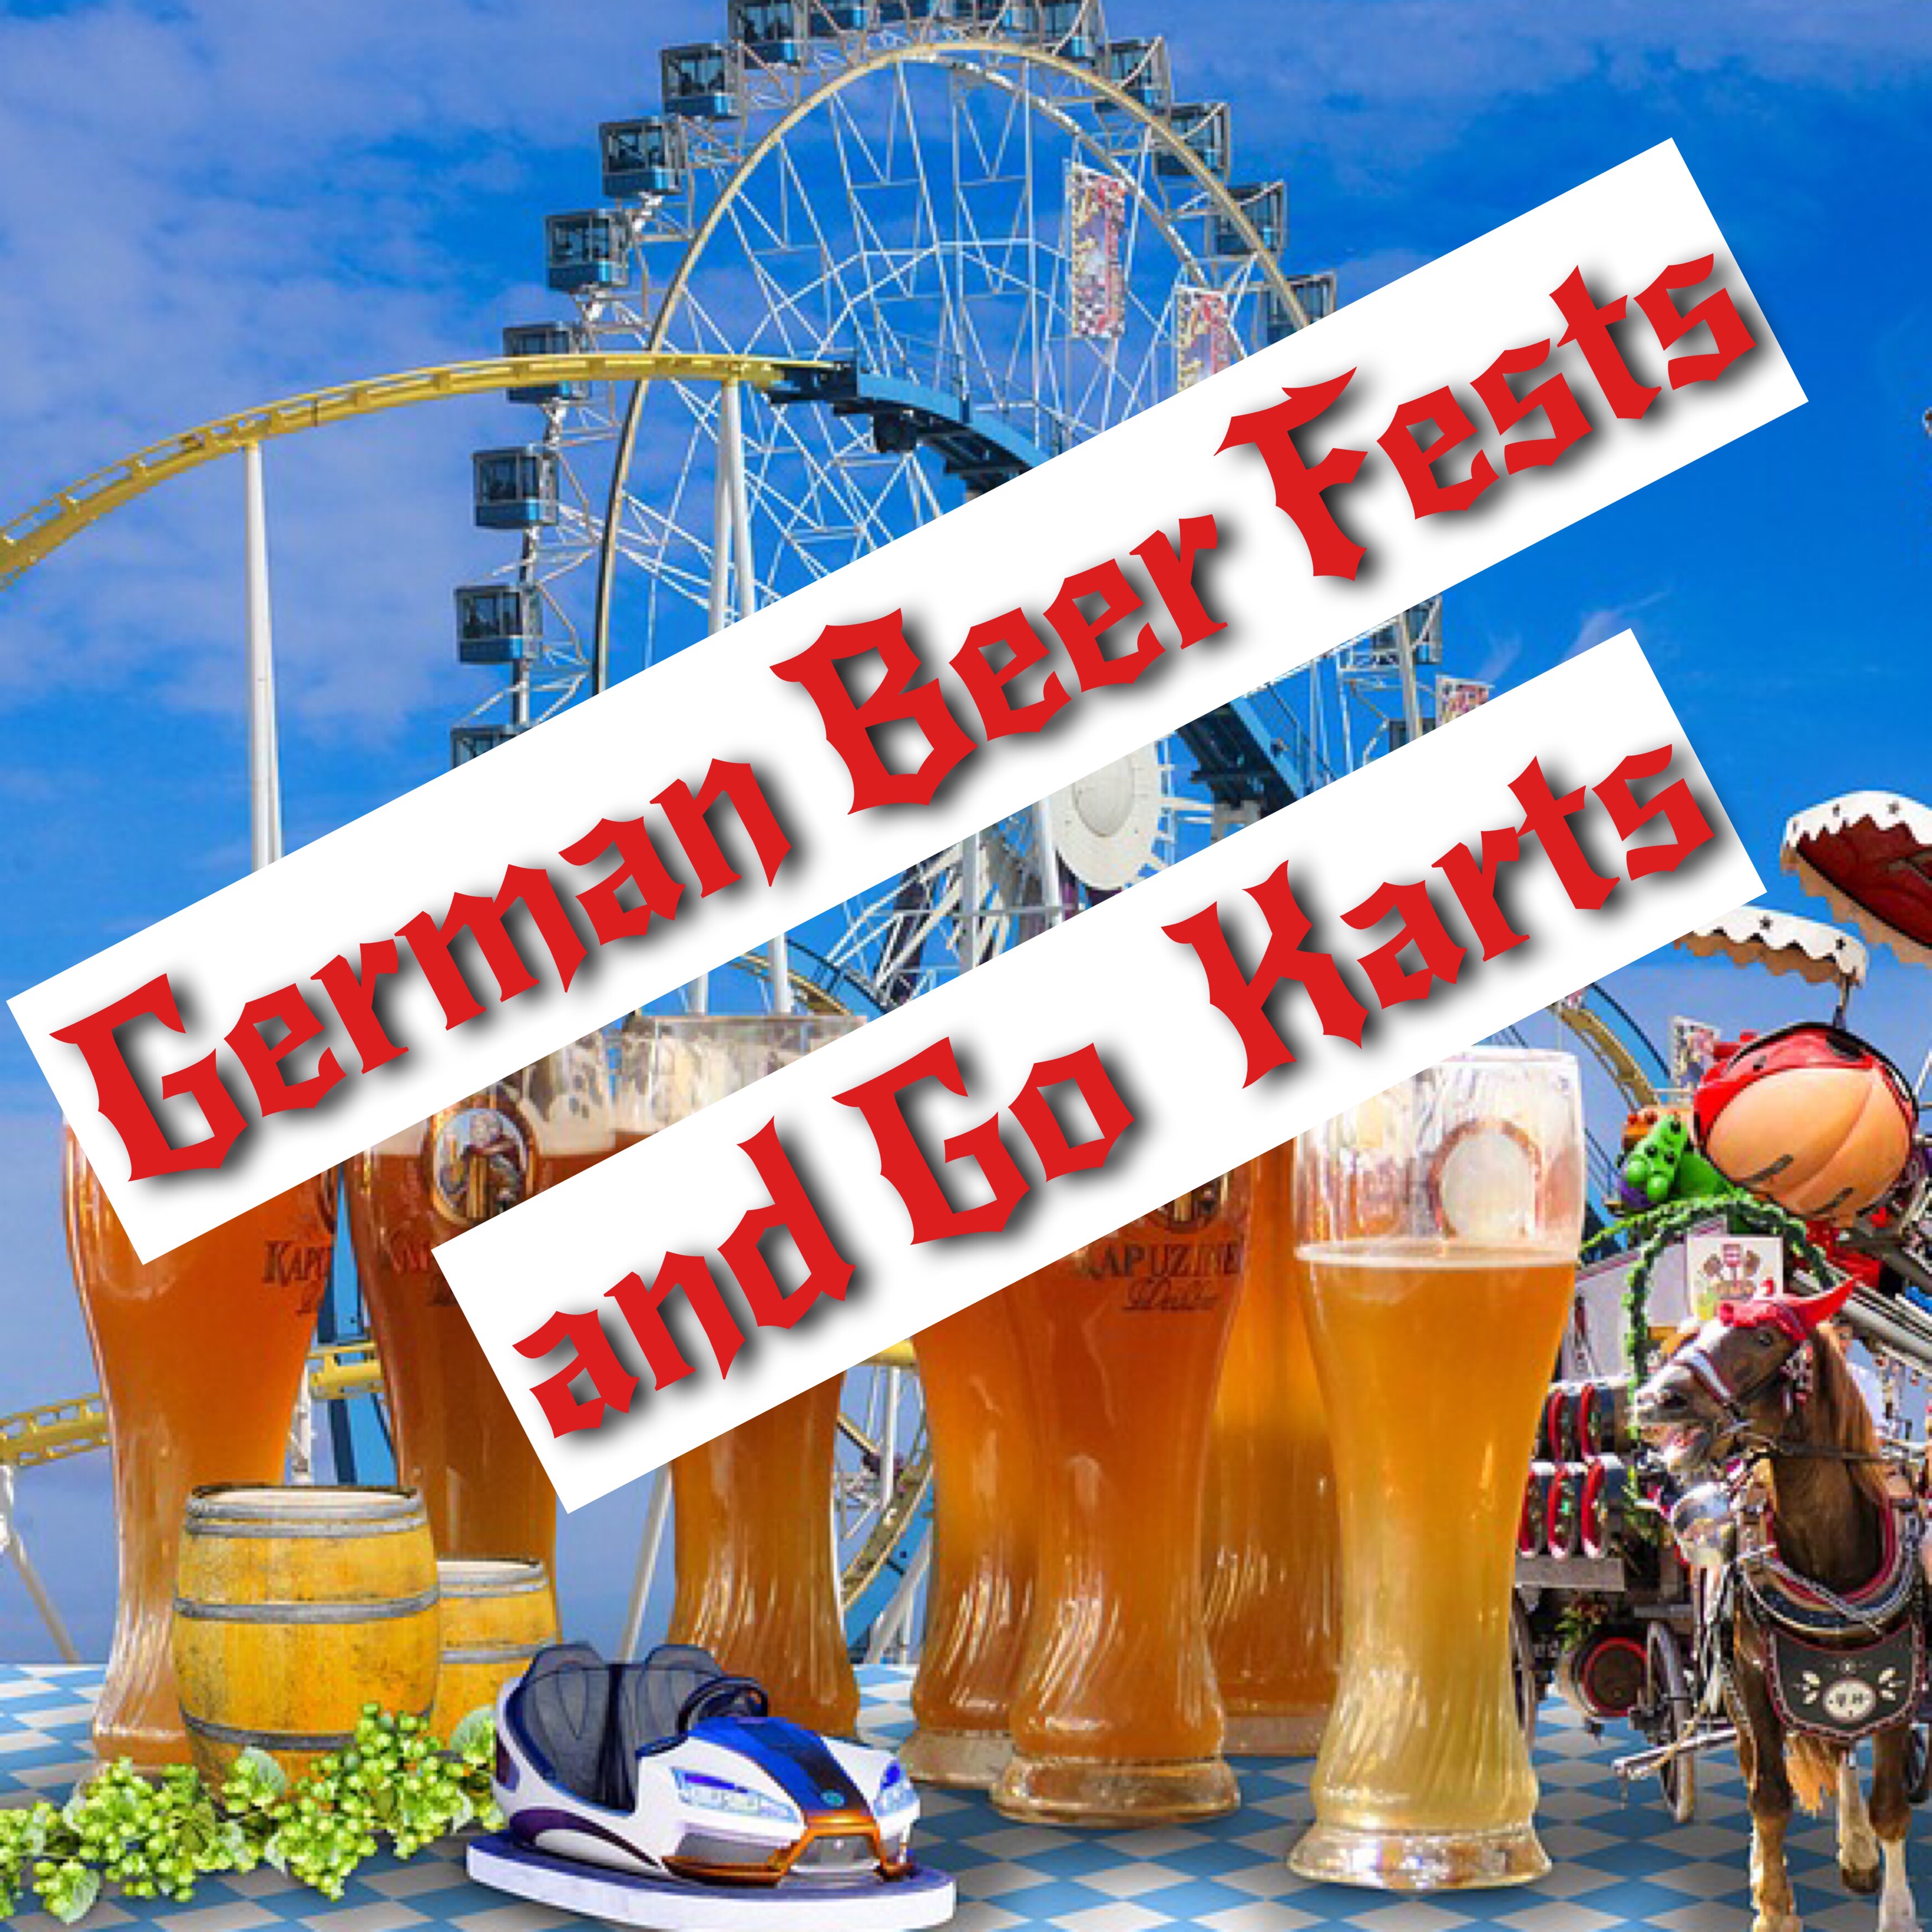 German Beer Fests and Go Carts